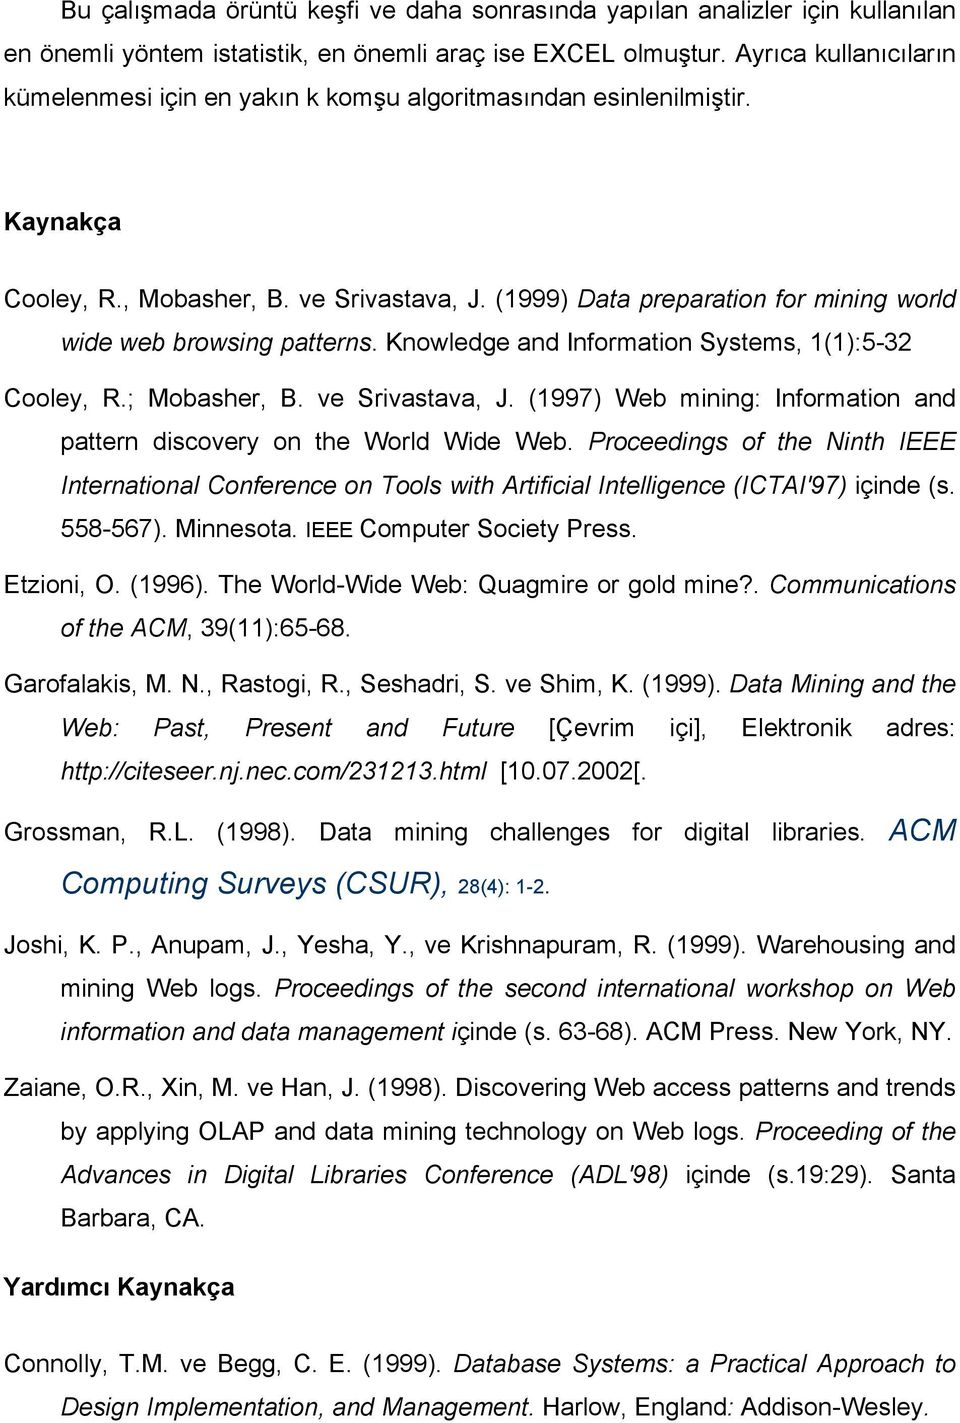 (1999) Data preparation for mining world wide web browsing patterns. Knowledge and Information Systems, 1(1):5-32 Cooley, R.; Mobasher, B. ve Srivastava, J.